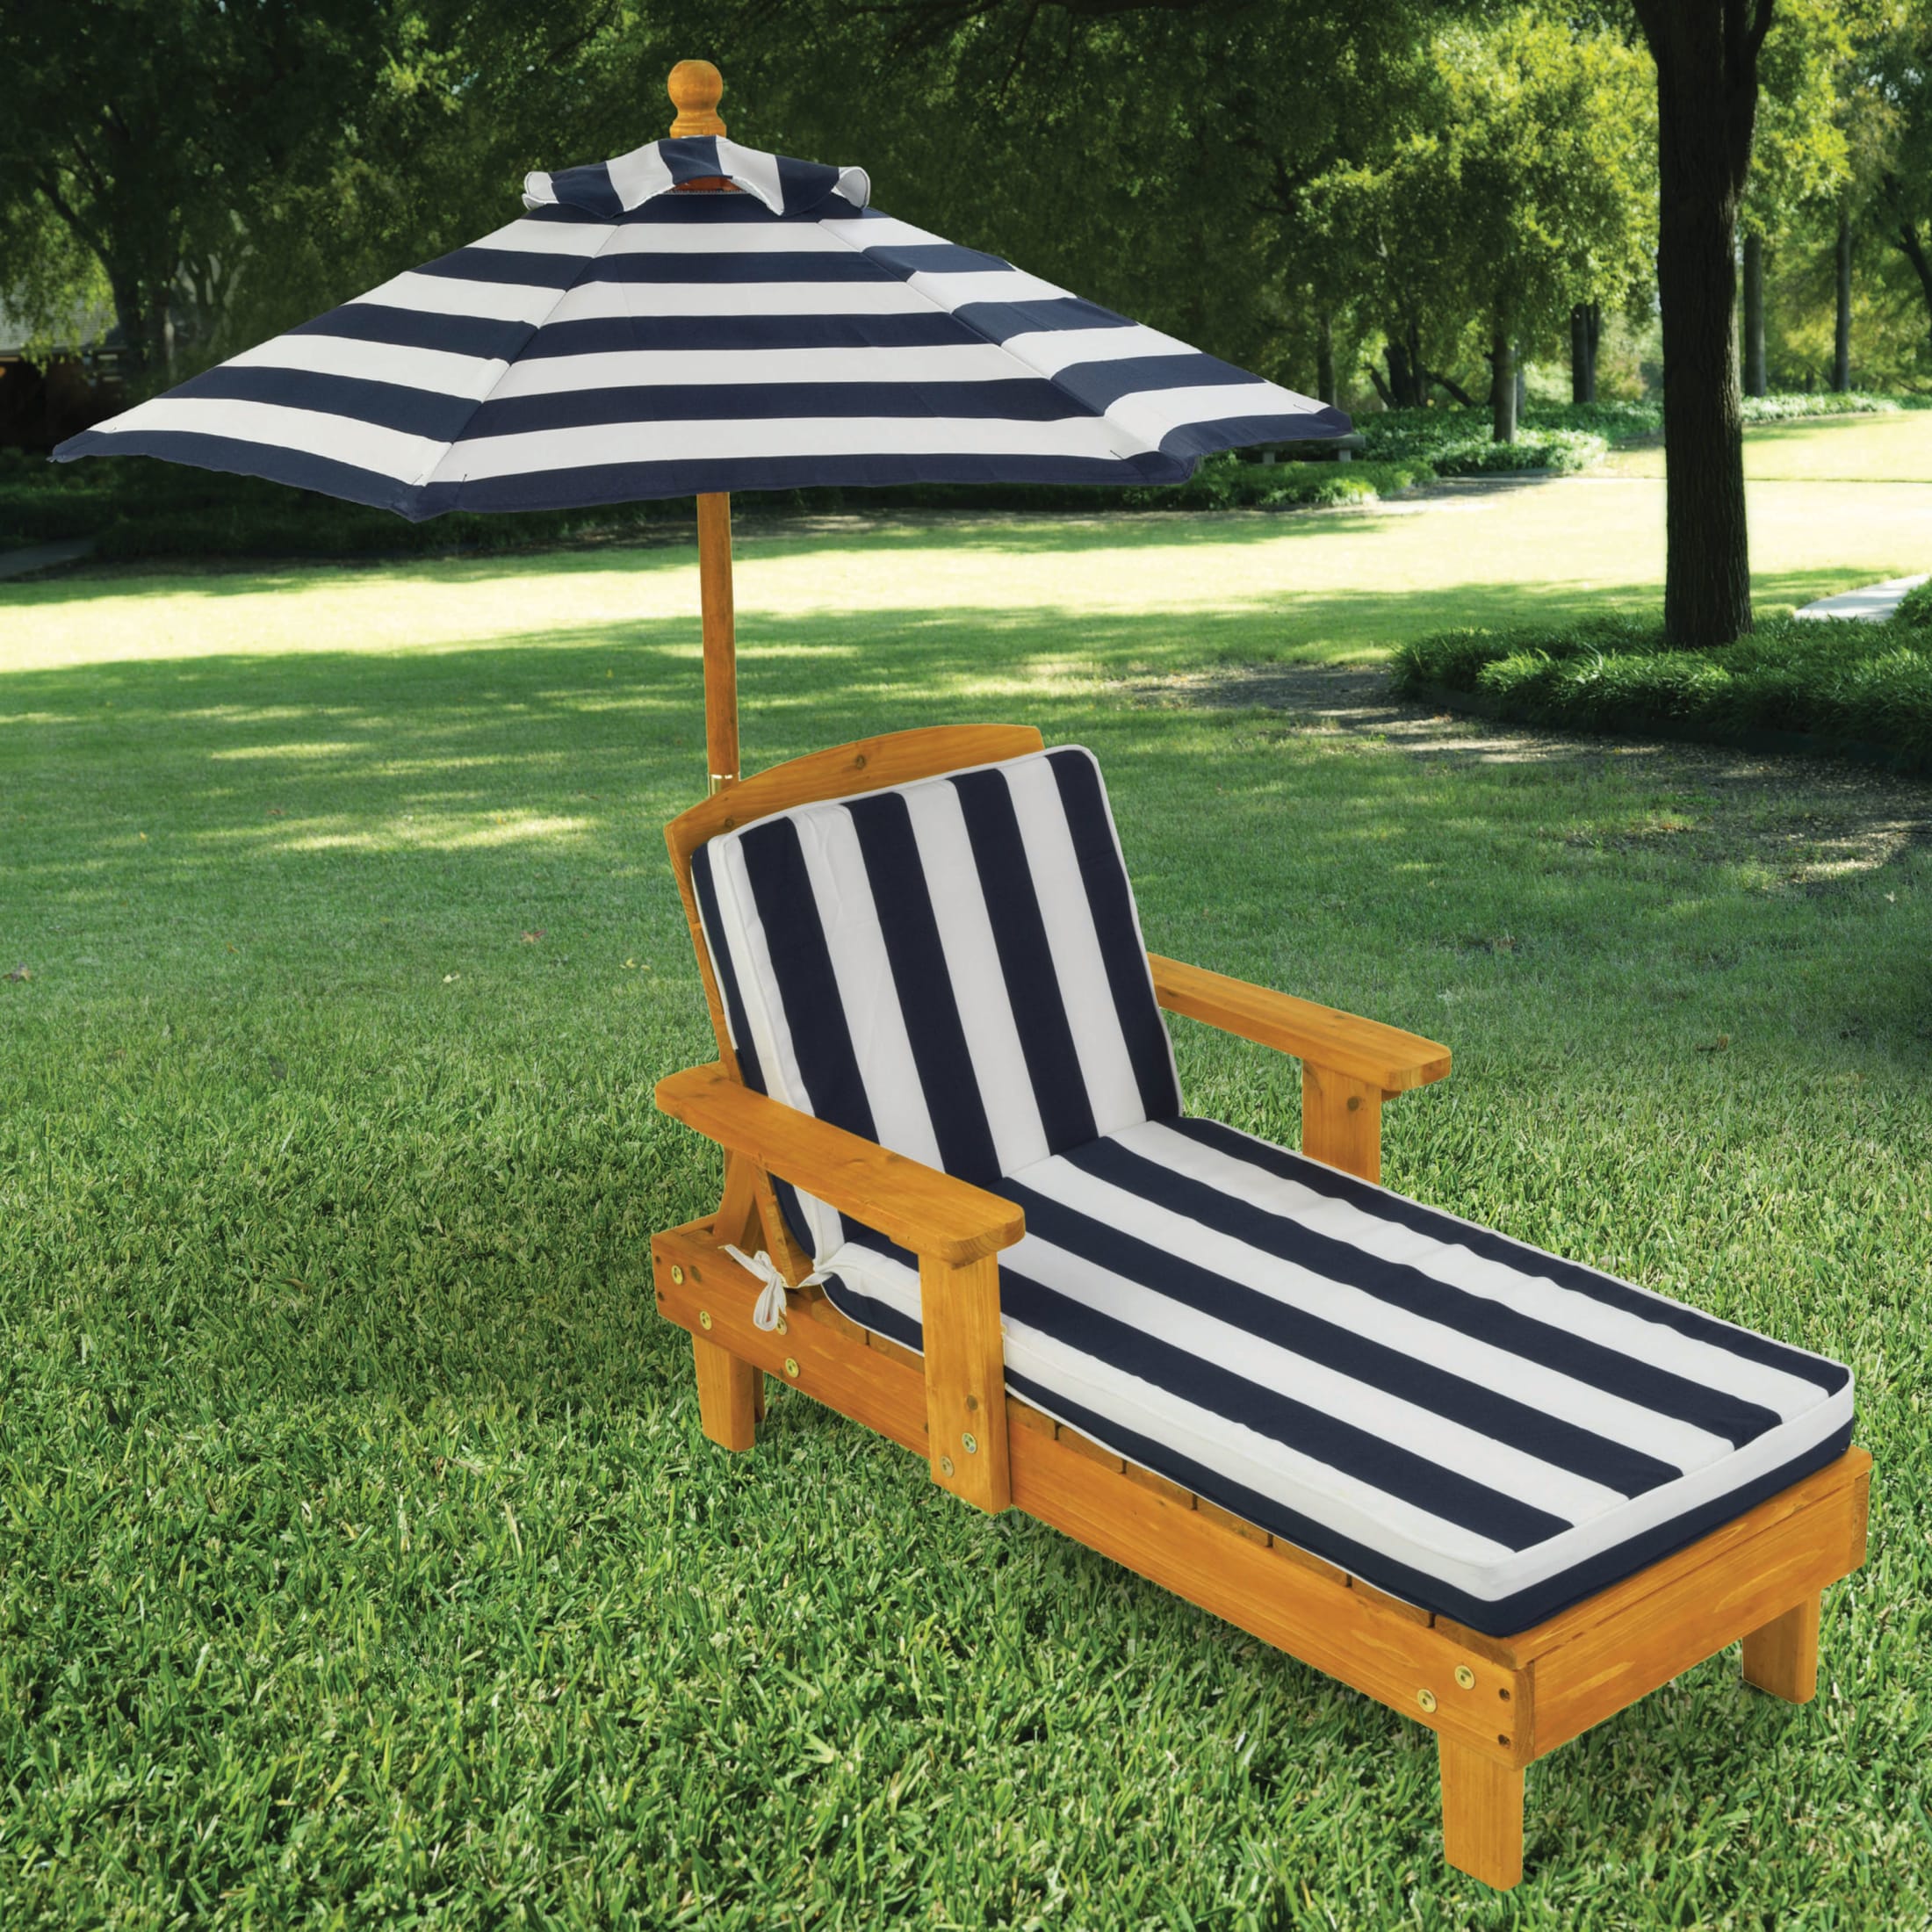 KidKraft Outdoor Wood Chaise Children's Chair with Umbrella and Cushion, Navy and White - image 1 of 10